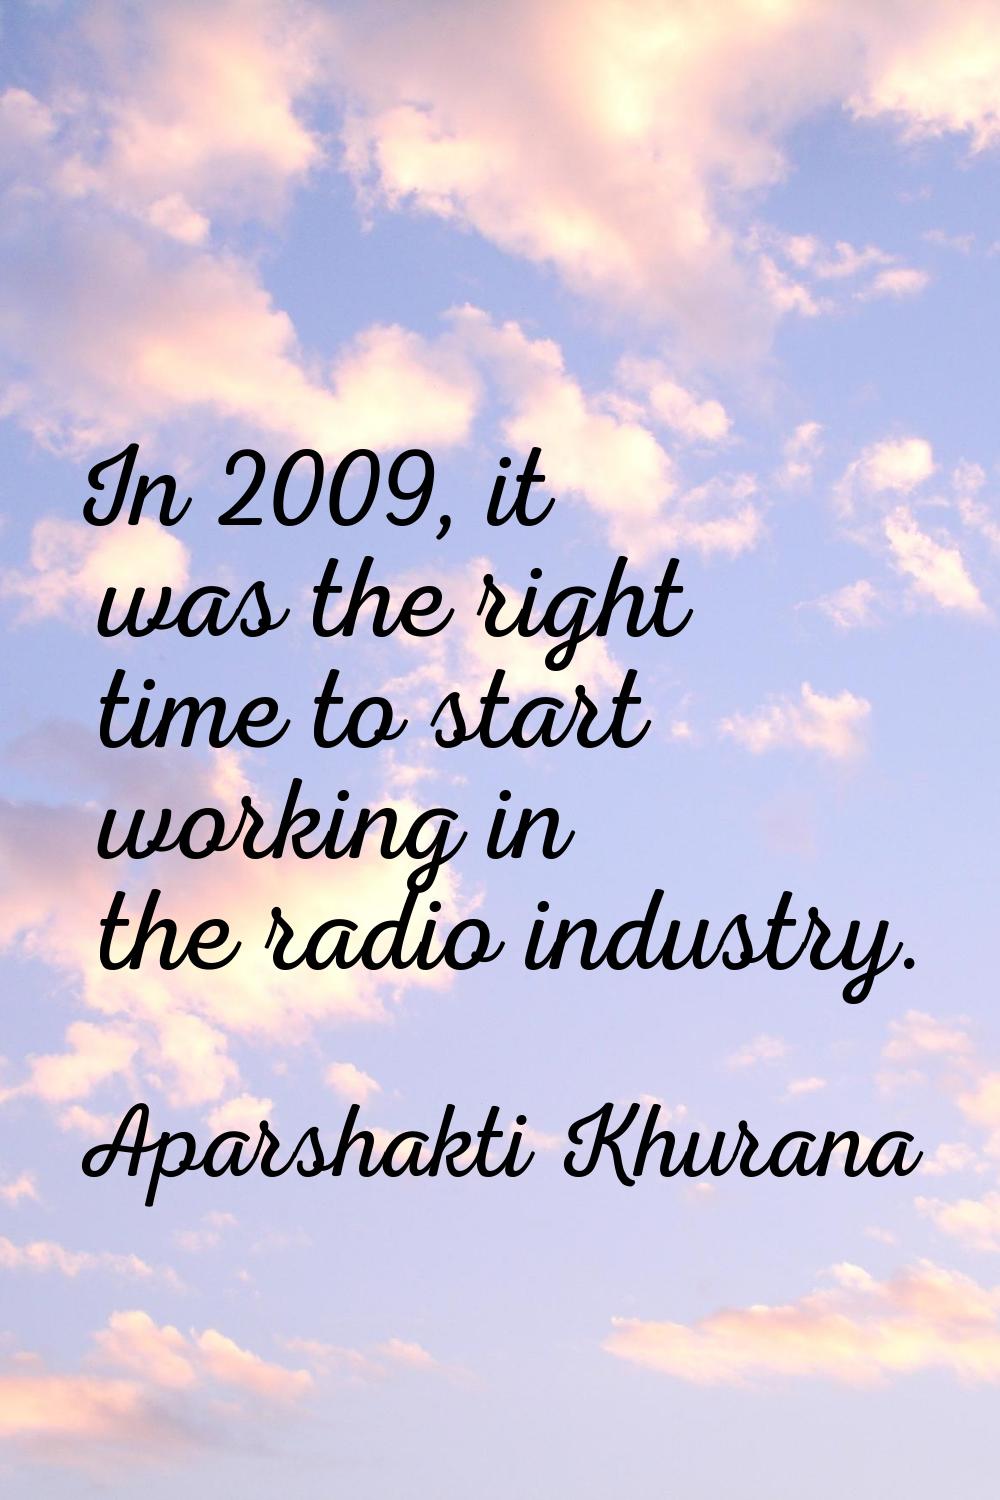 In 2009, it was the right time to start working in the radio industry.